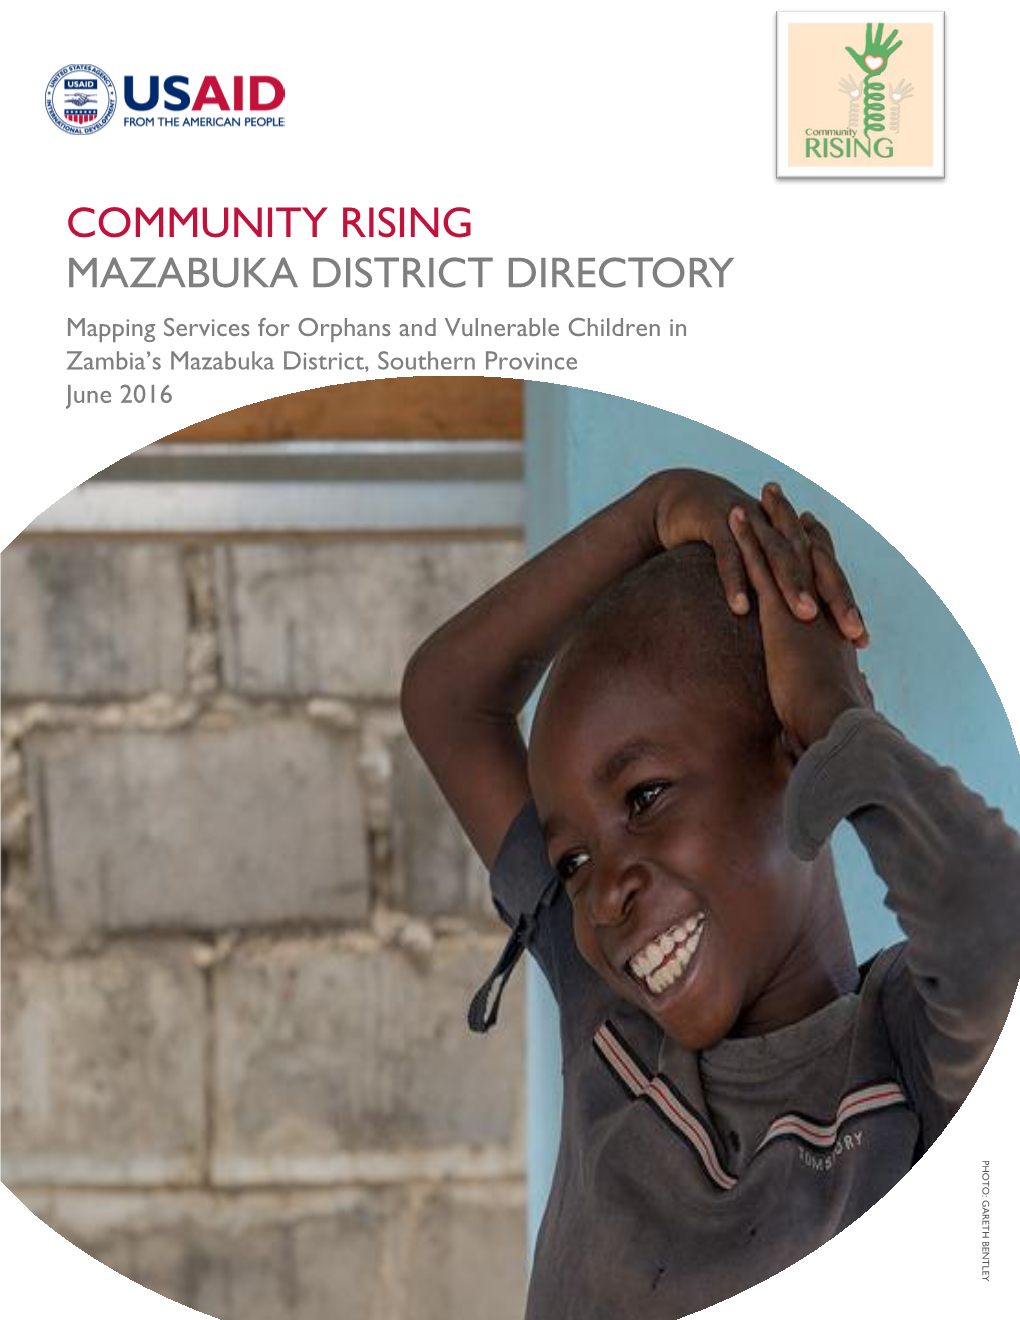 COMMUNITY RISING MAZABUKA DISTRICT DIRECTORY Mapping Services for Orphans and Vulnerable Children in Zambia’S Mazabuka District, Southern Province June 2016